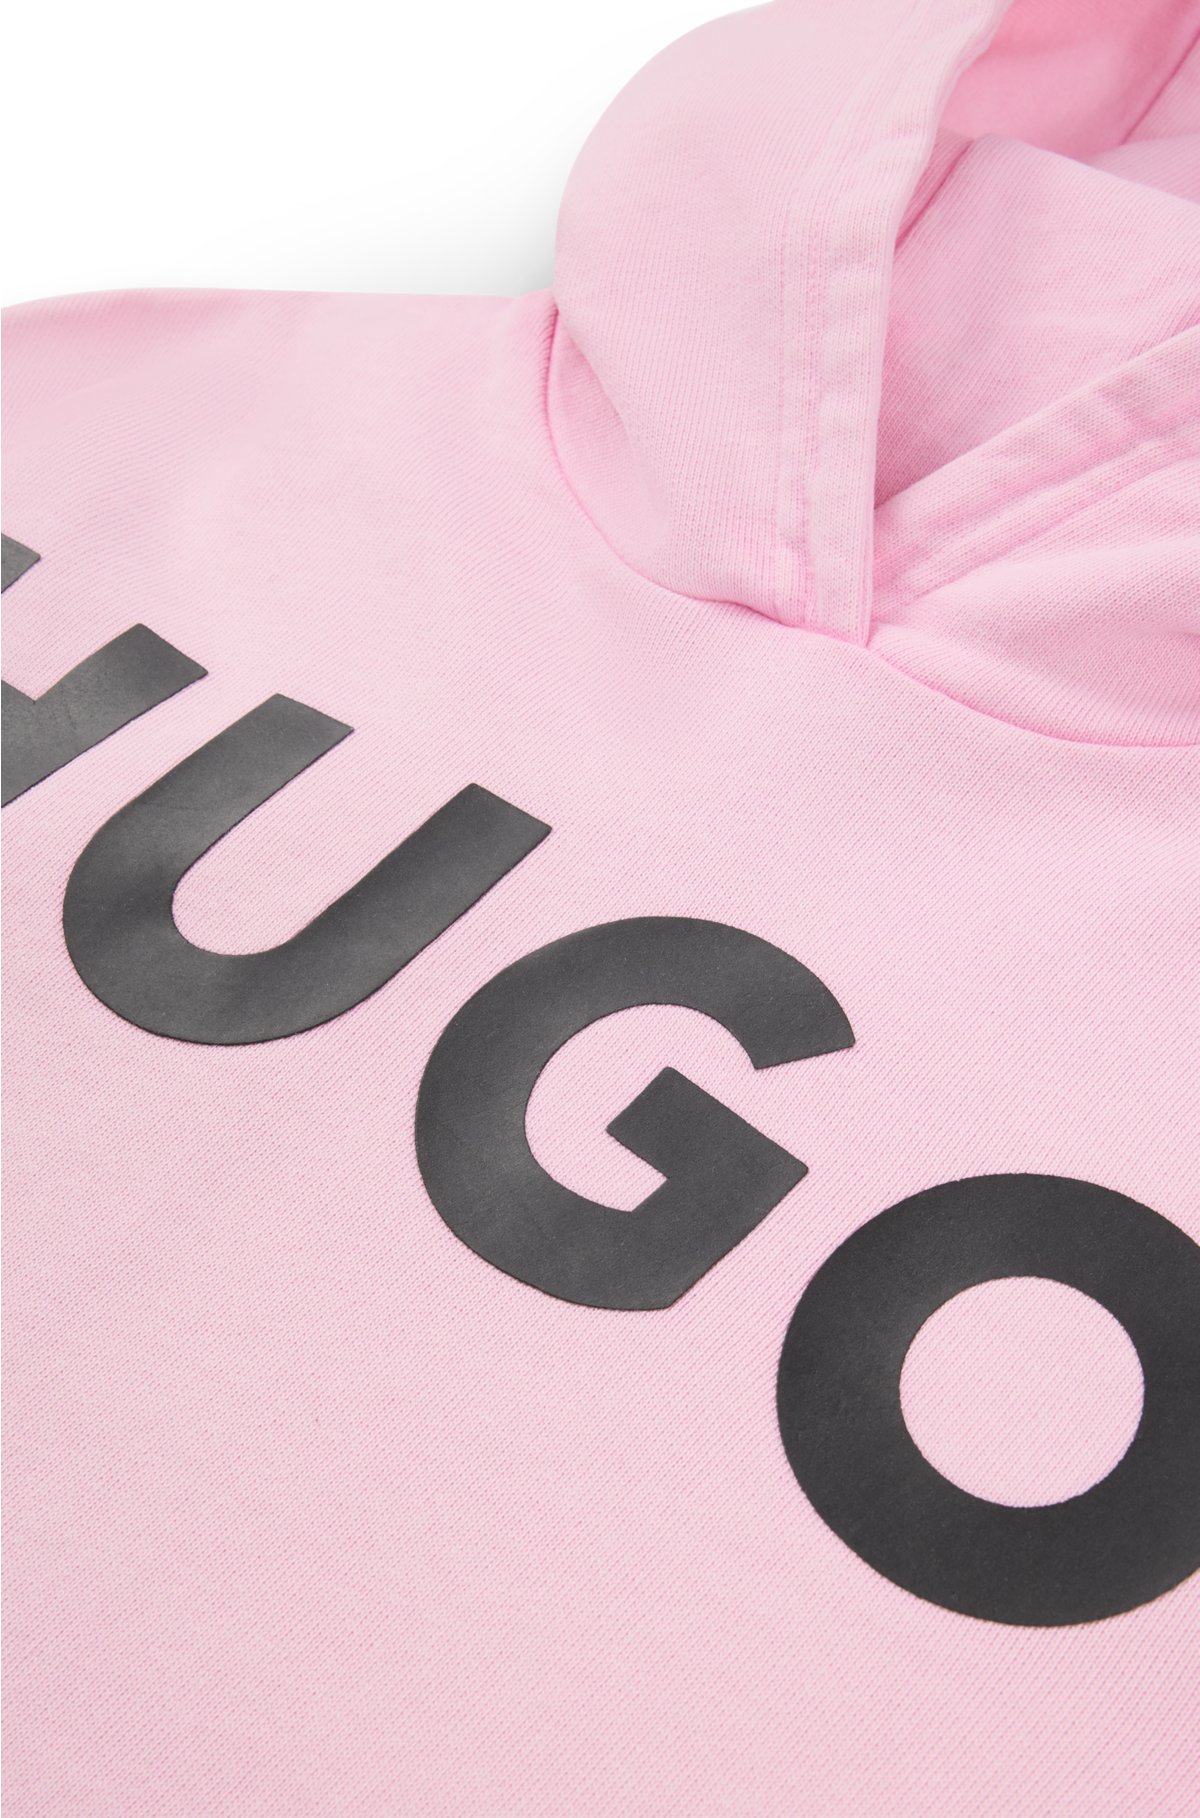 Kids' hoodie in French-terry cotton with logo print, Pink